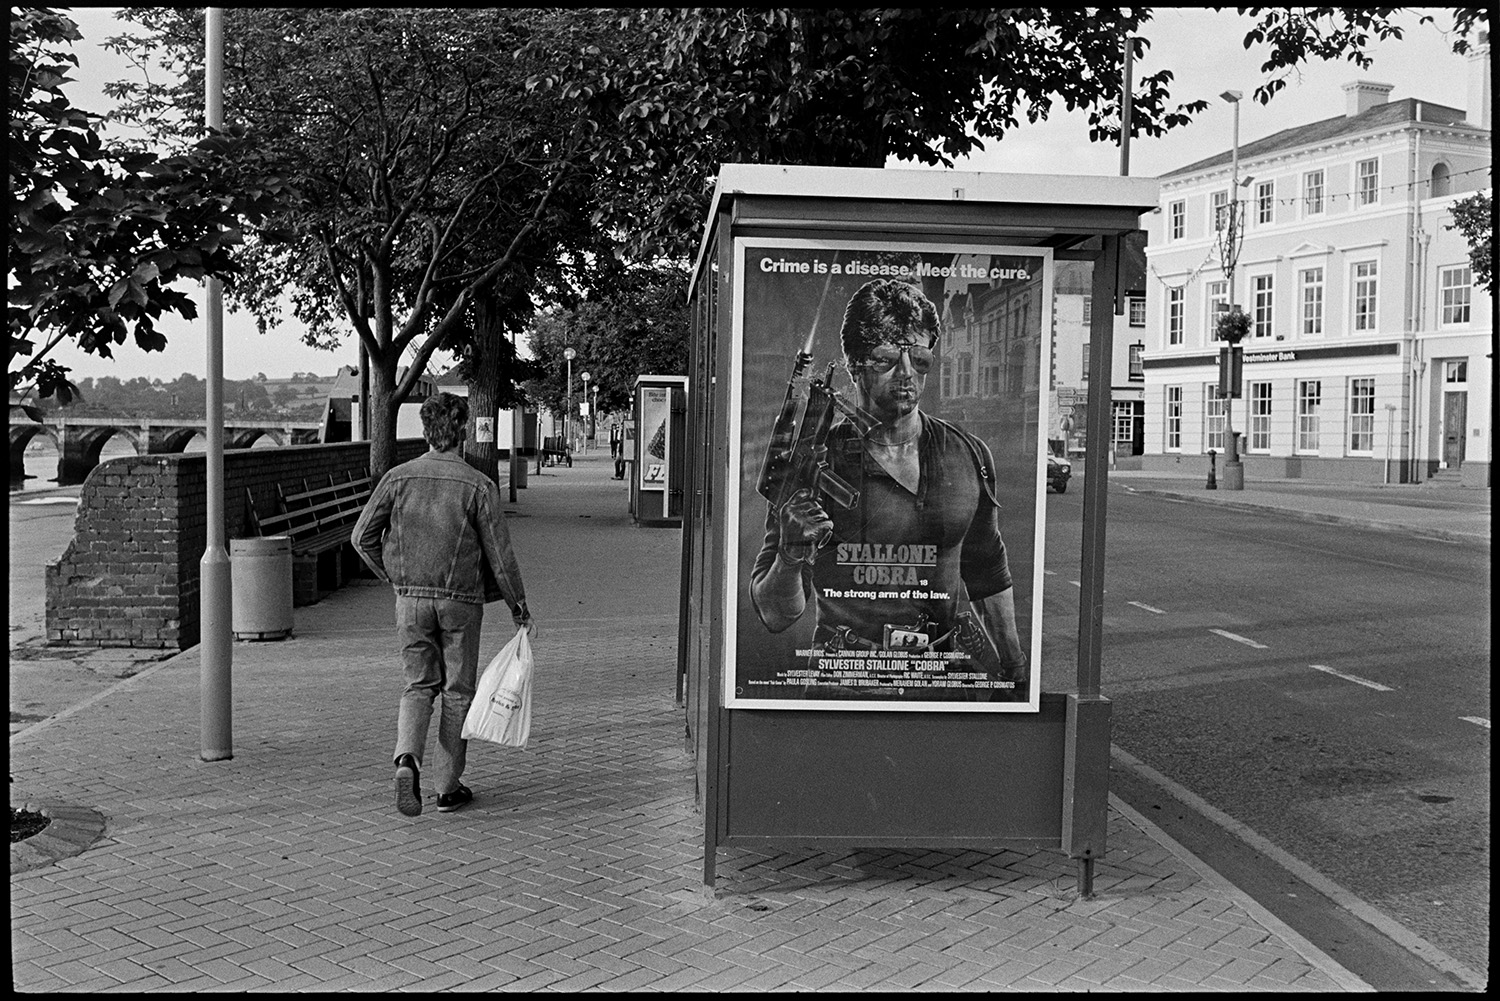 Cinema film advert on the end of bus shelter for violent macho Stallone Cobra - sad! 
[A person holding a carrier bag walking past a bus shelter, with an advert for the film Cobra, starring Sylvester Stallone, alongside the riverfront at Bideford. Bideford Long Bridge, also known as Bideford Old Bridge, can be seen in the background.]